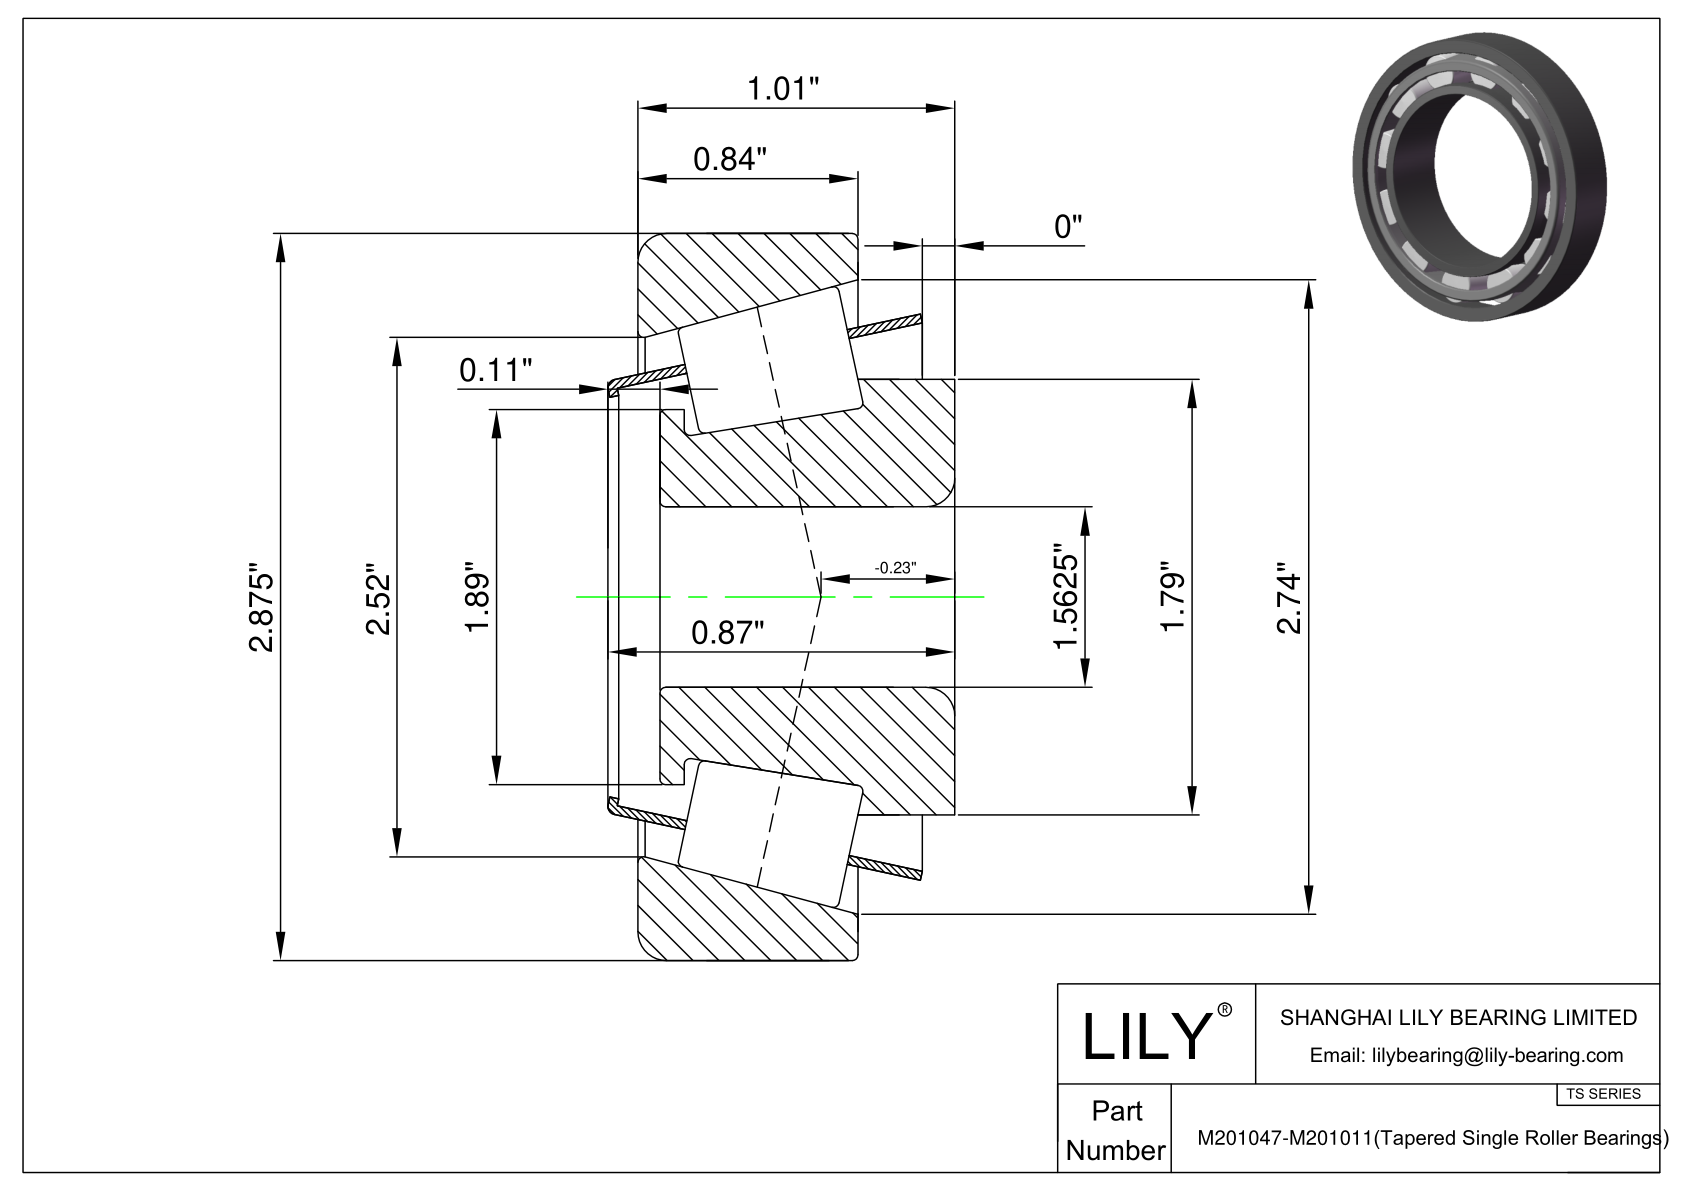 M201047-M201011 TS (Tapered Single Roller Bearings) (Imperial) cad drawing